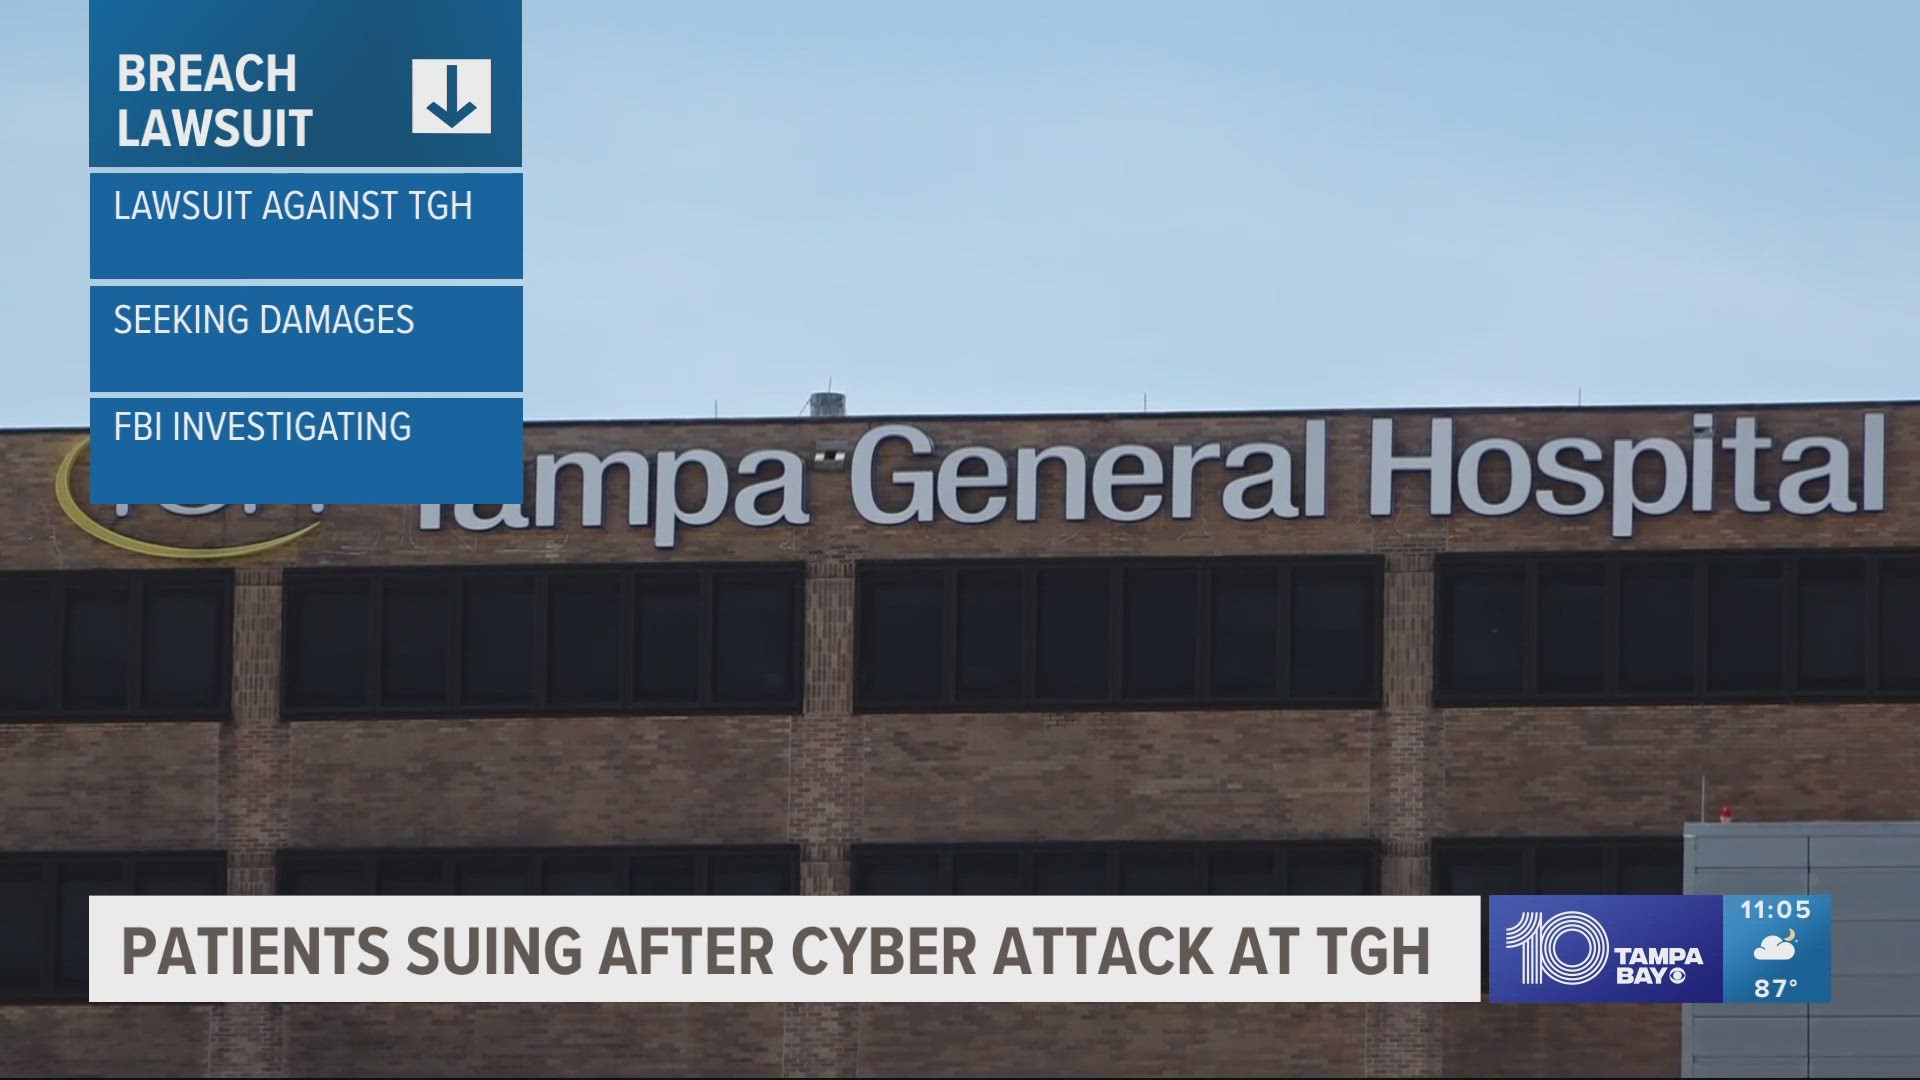 The lawsuit was filed on behalf of three victims who say TGH allegedly failed to protect their personal and medical information.